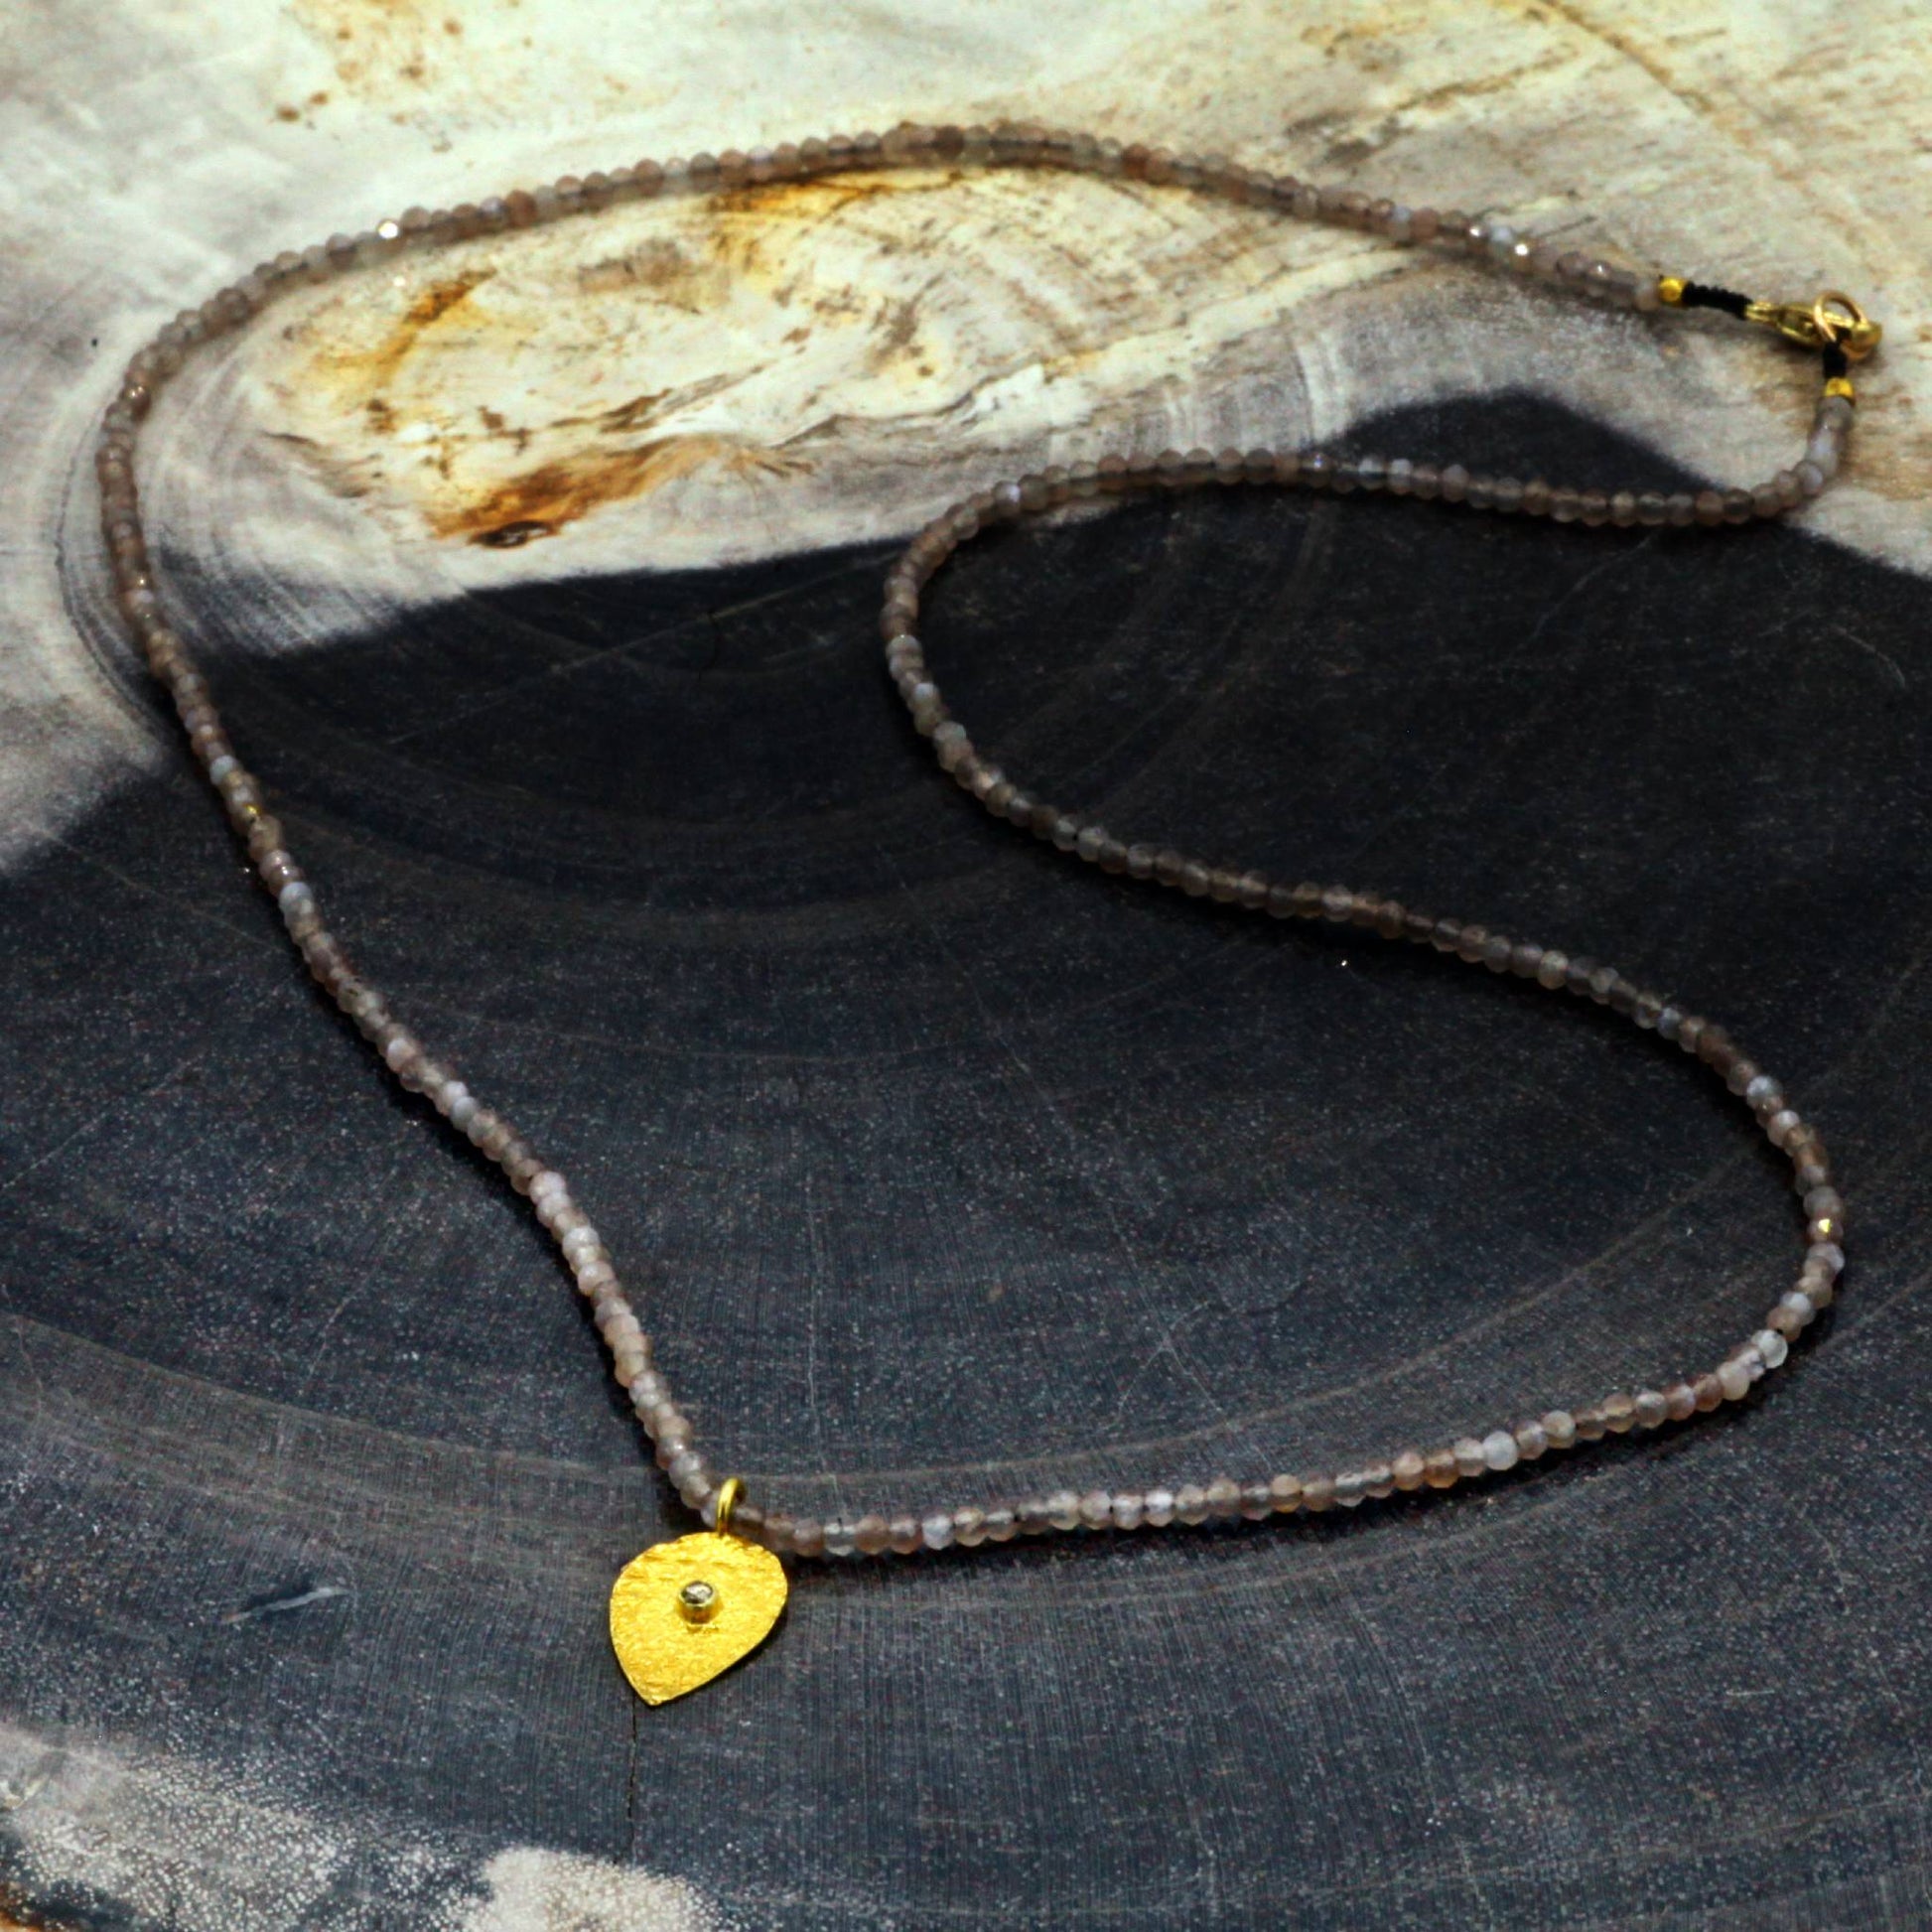 Margeret Solow Jewelry | Chocolate Moonstone + Diamond 18k Gold Drop Necklace | Firecracker